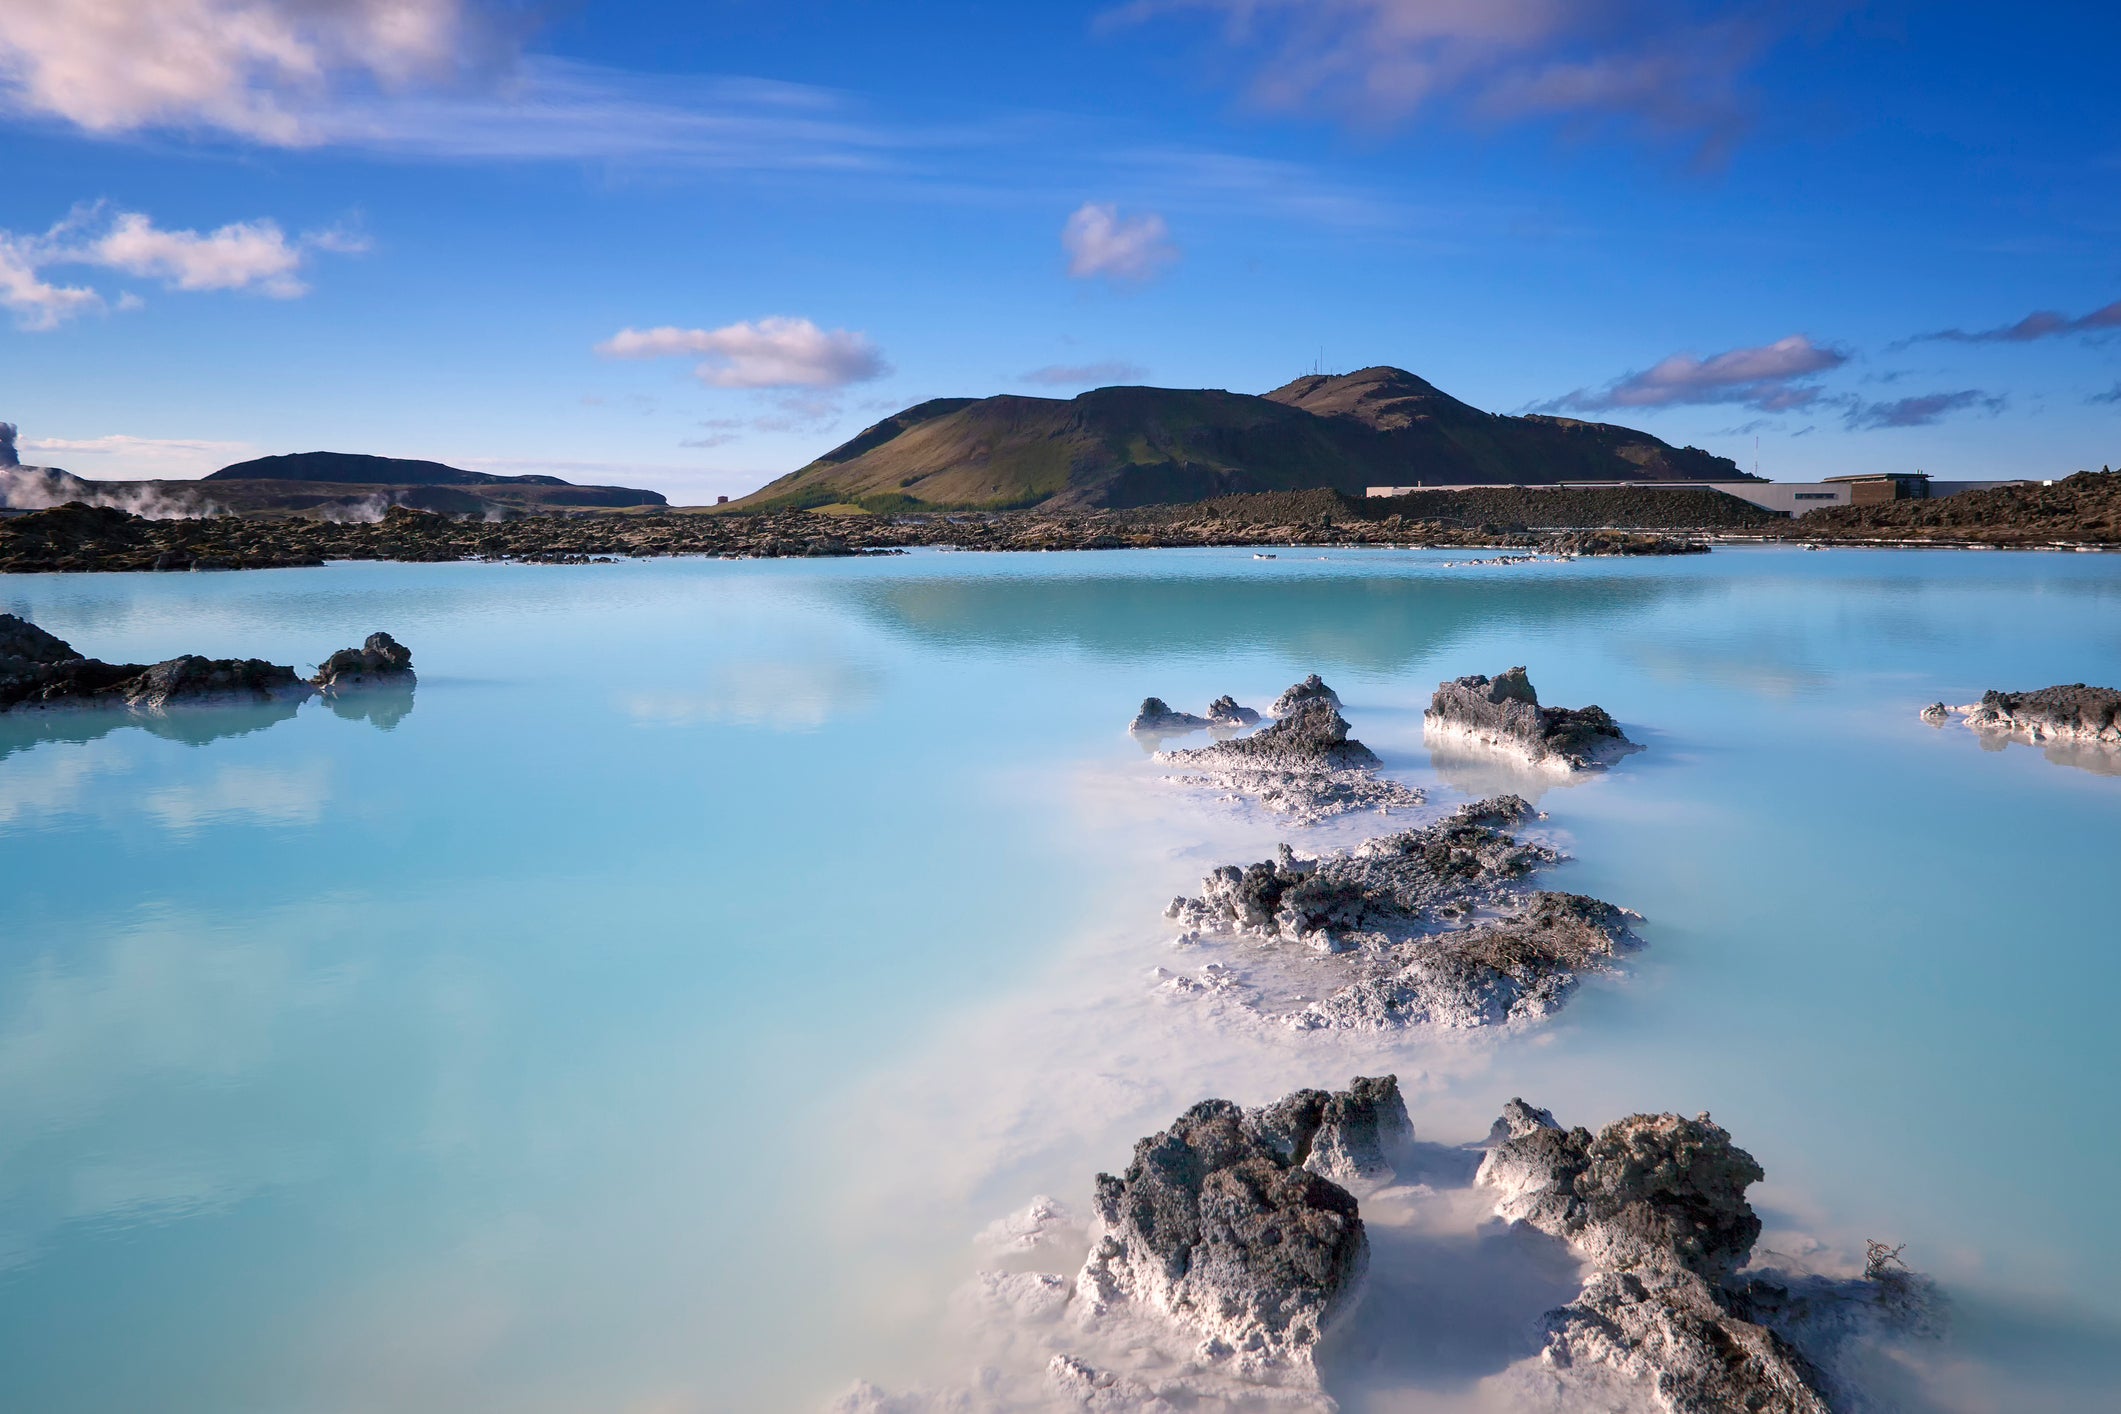 Iceland’s most famous hot pool is a dreamy joint spa experience